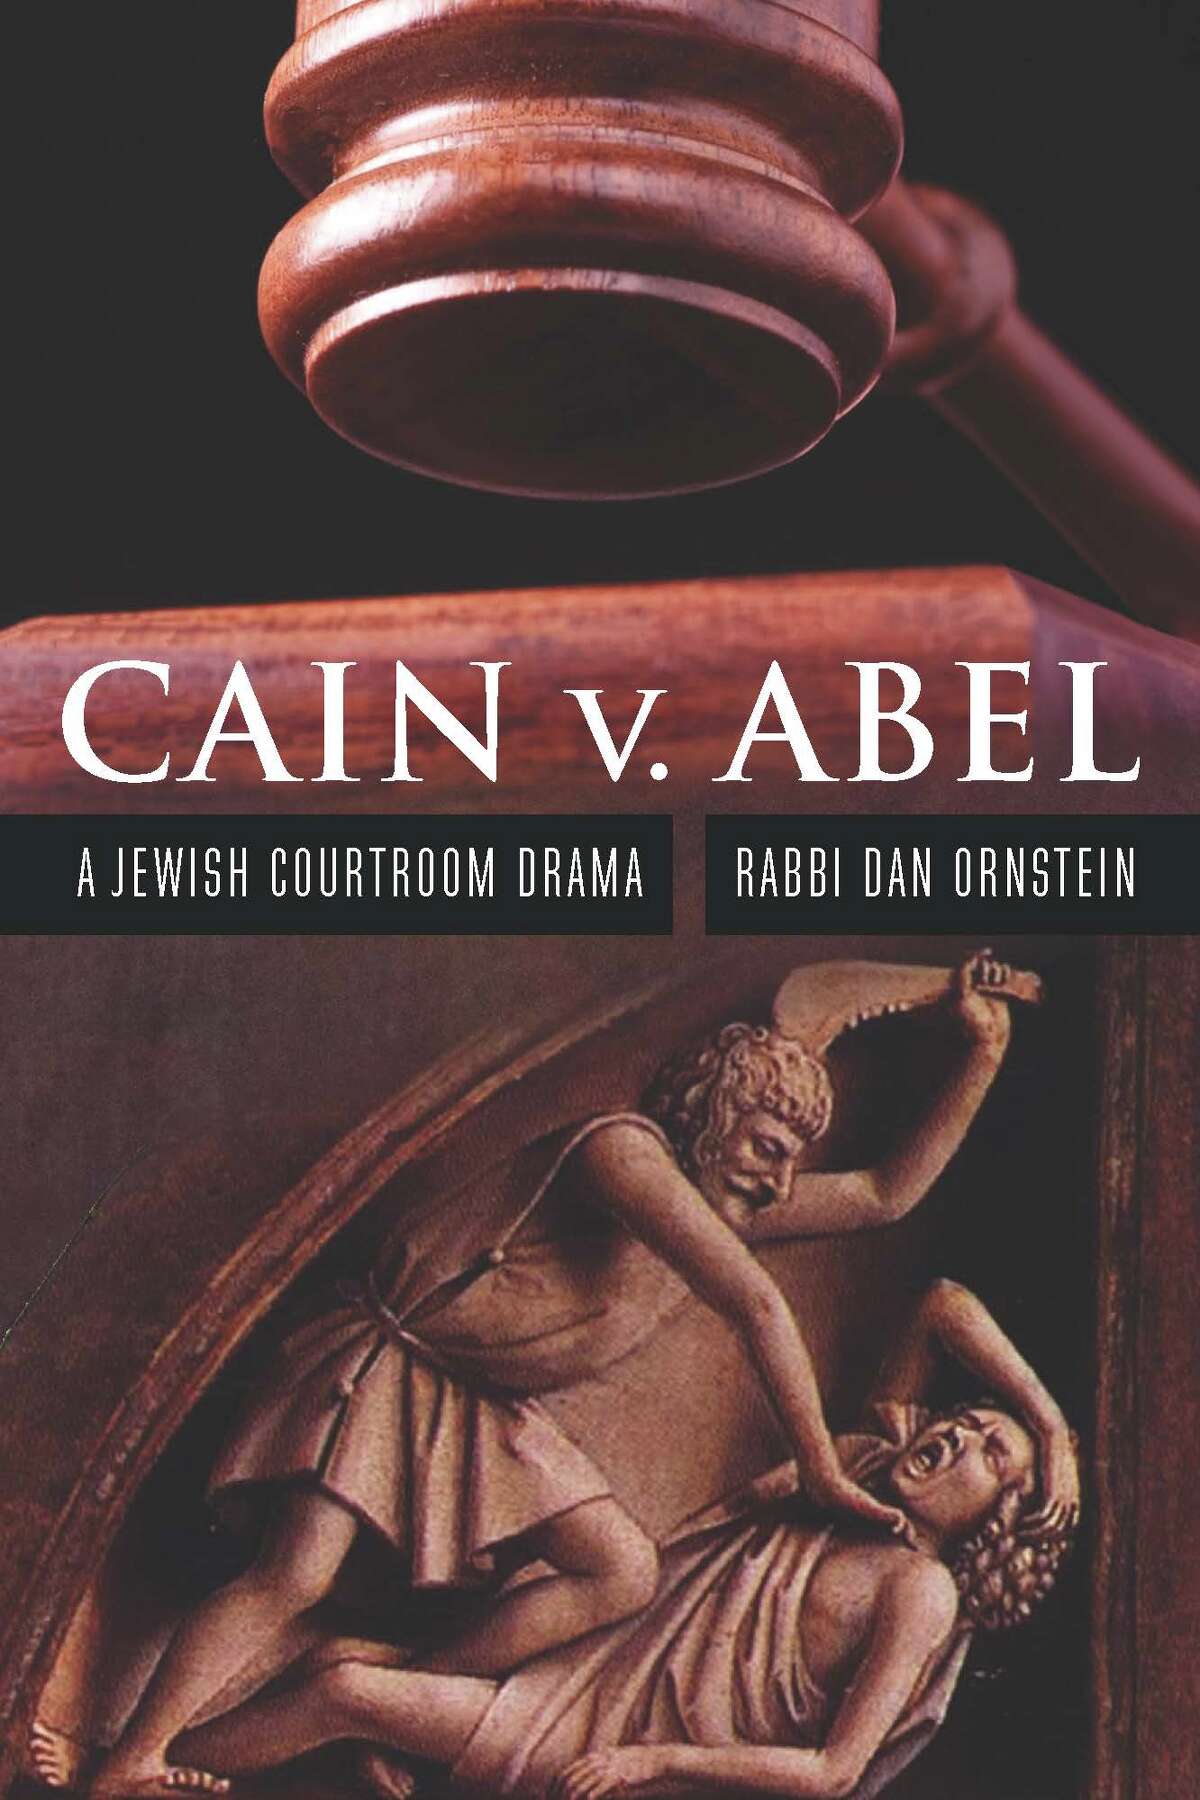 Rabbi Dan Ornstein, co-rabbi at Congregation Ohav Shalom, has written a courtroom drama based on the Biblical tale of Cain and Abel.